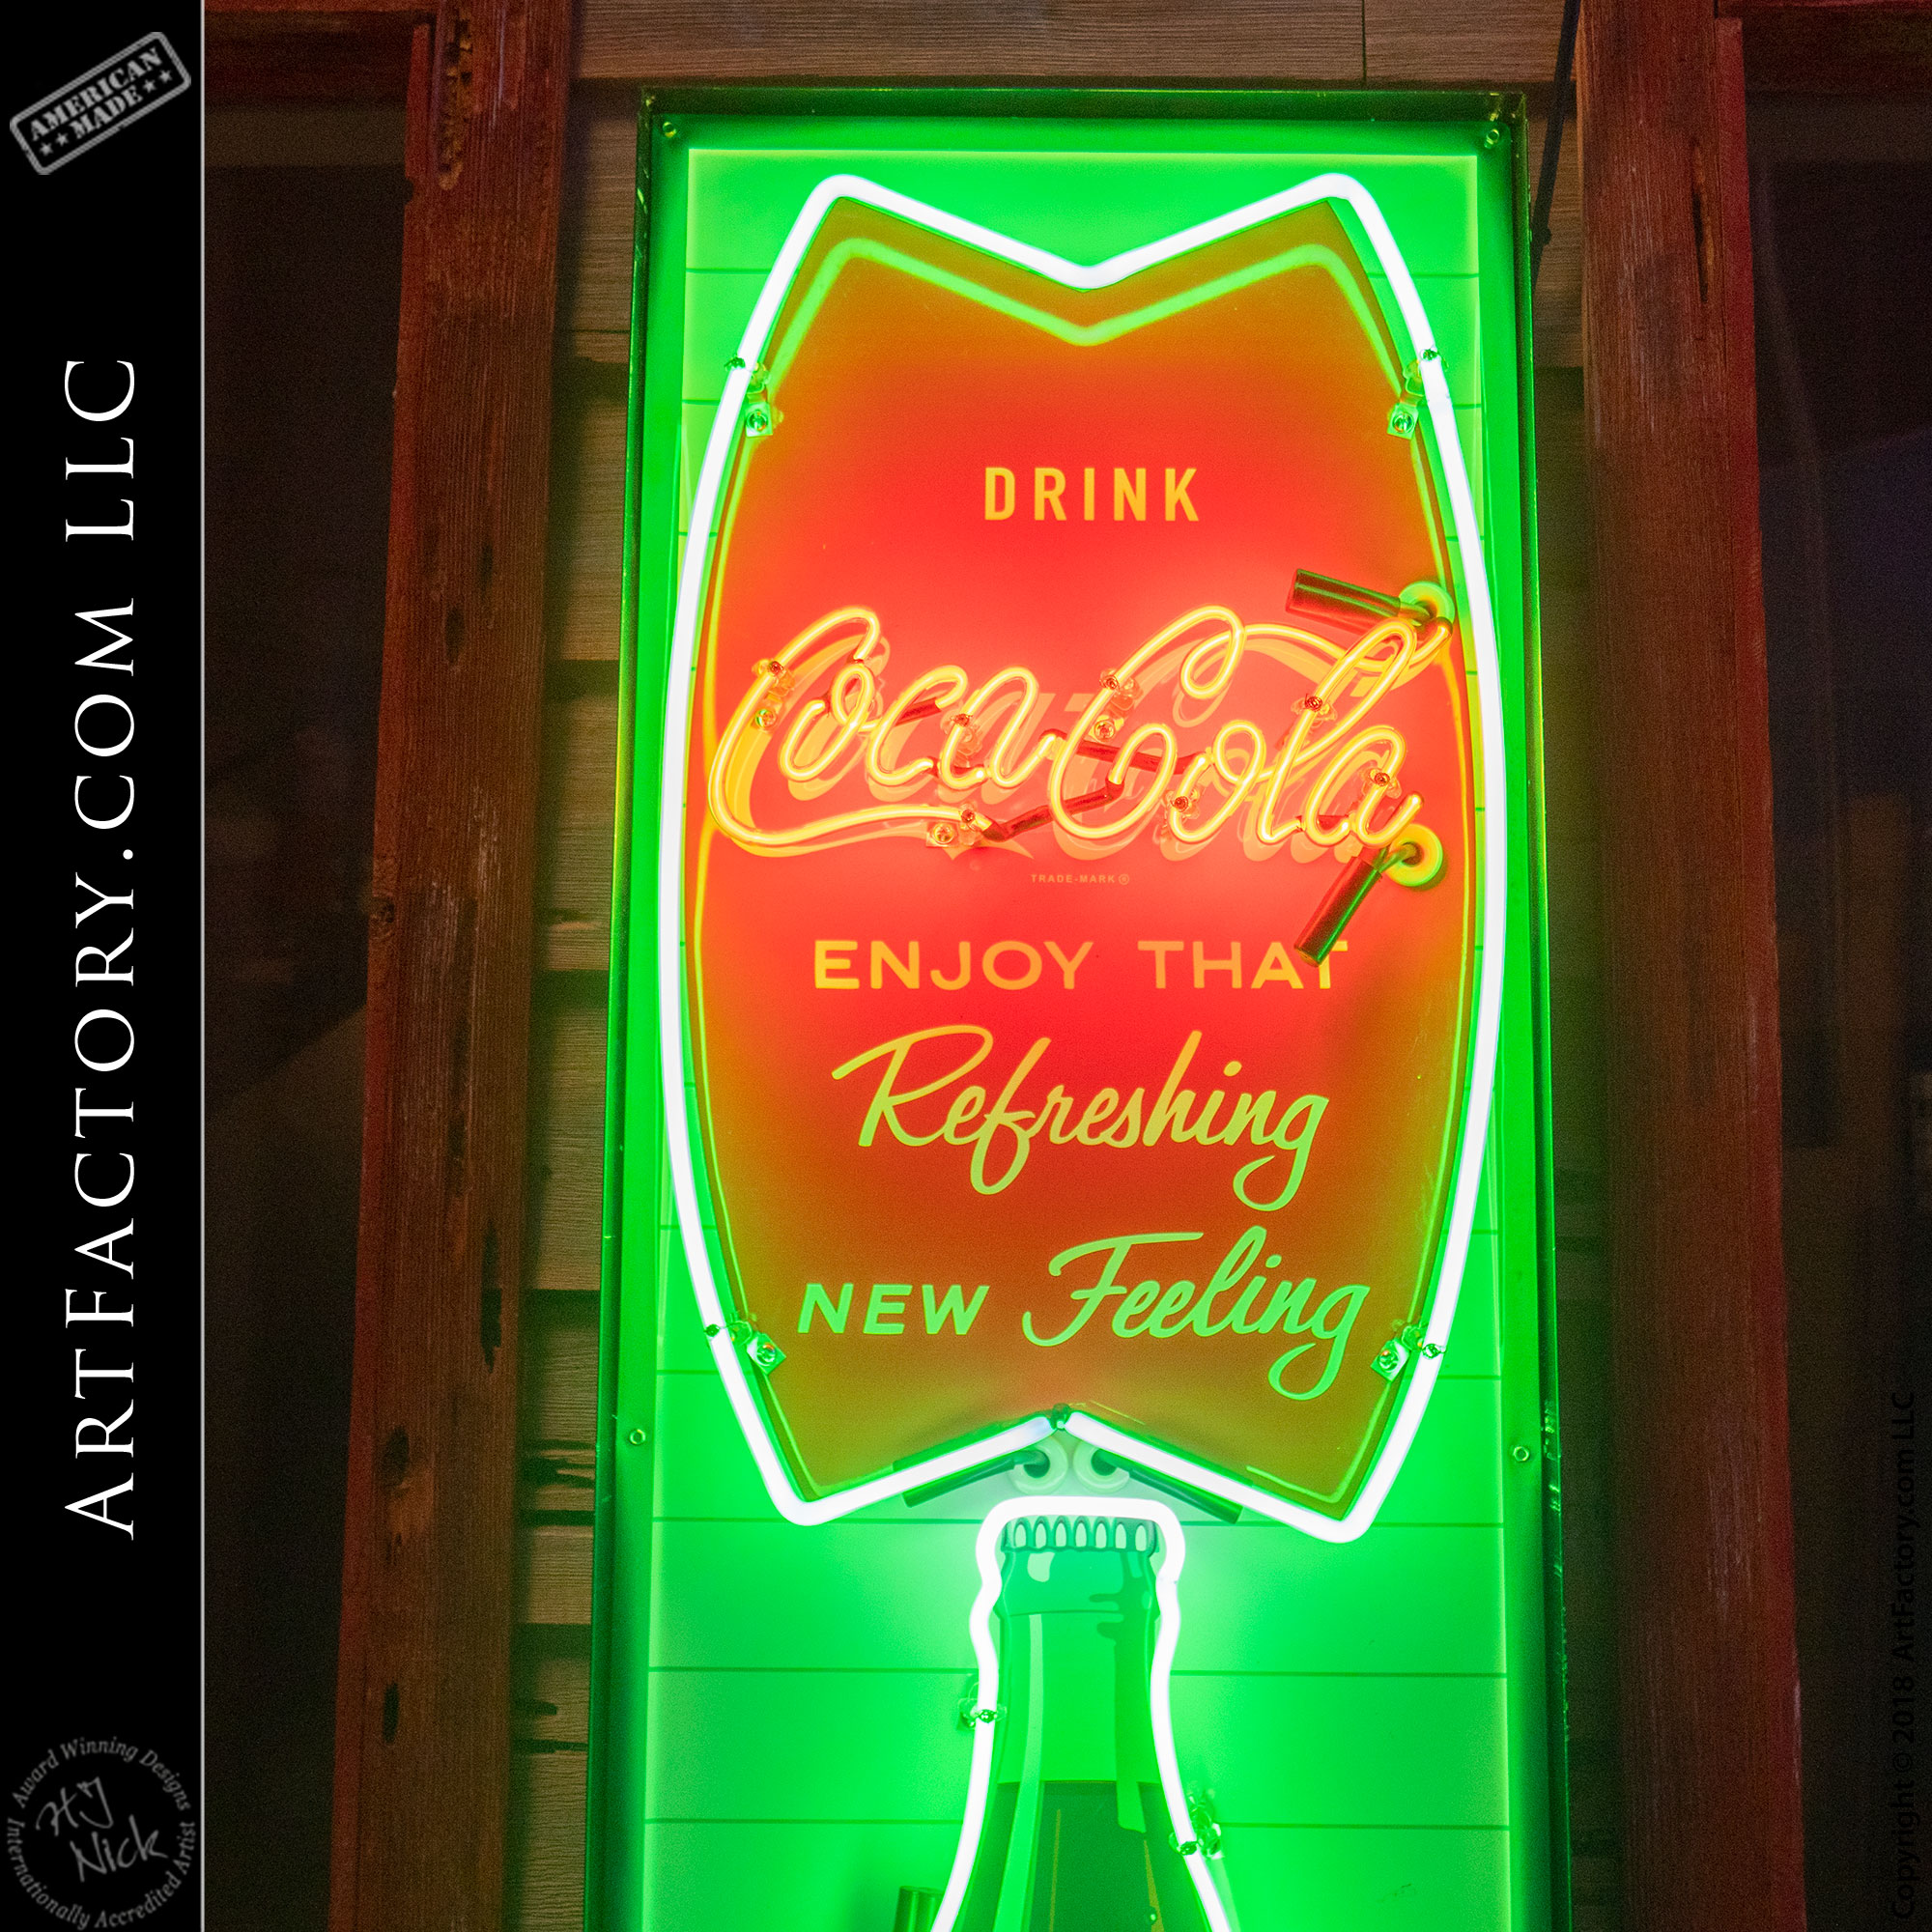 New Vintage Drink Refreshing Coke Neon Sign